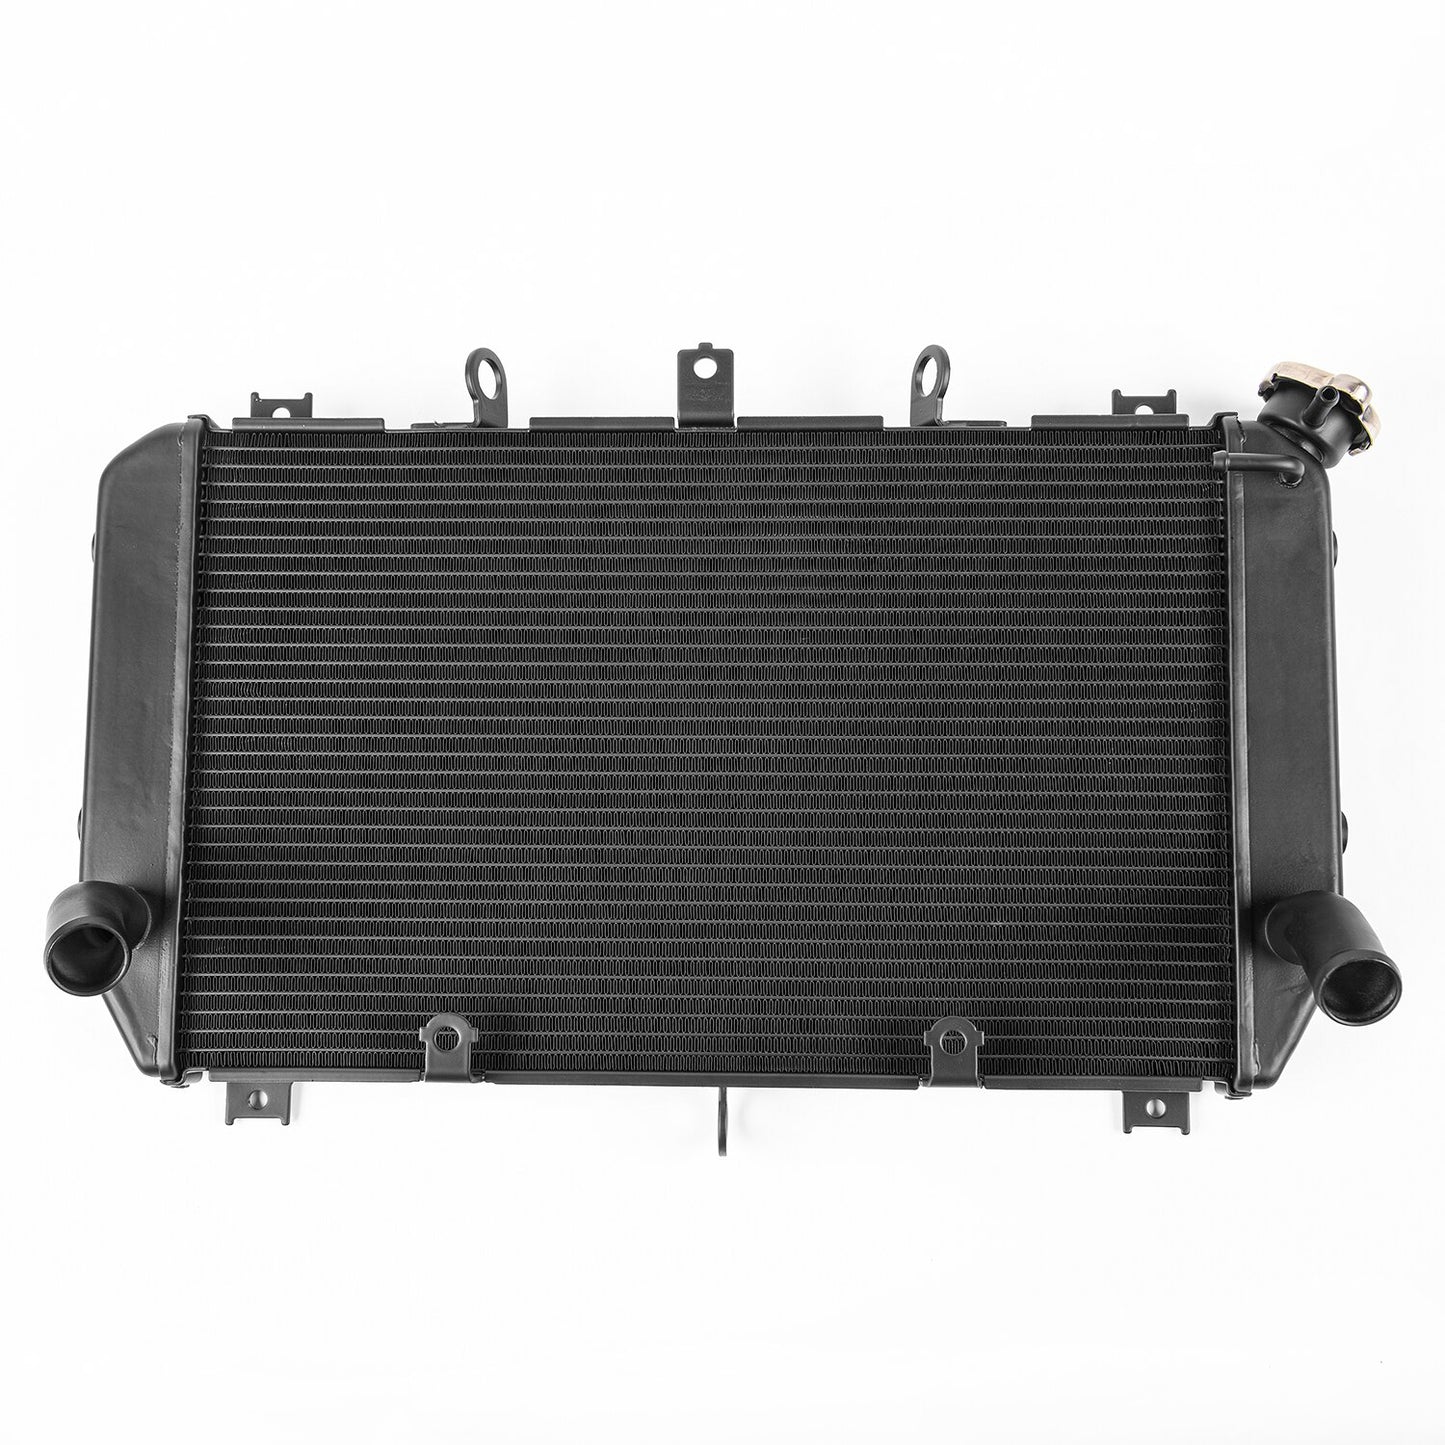 Wolfline Z900RS Engine Radiator Cooler Cooling System For Kawasaki Z900 RS 2018 2019 2020 2021 2022 2023 Aluminum Motorcycle Accessories